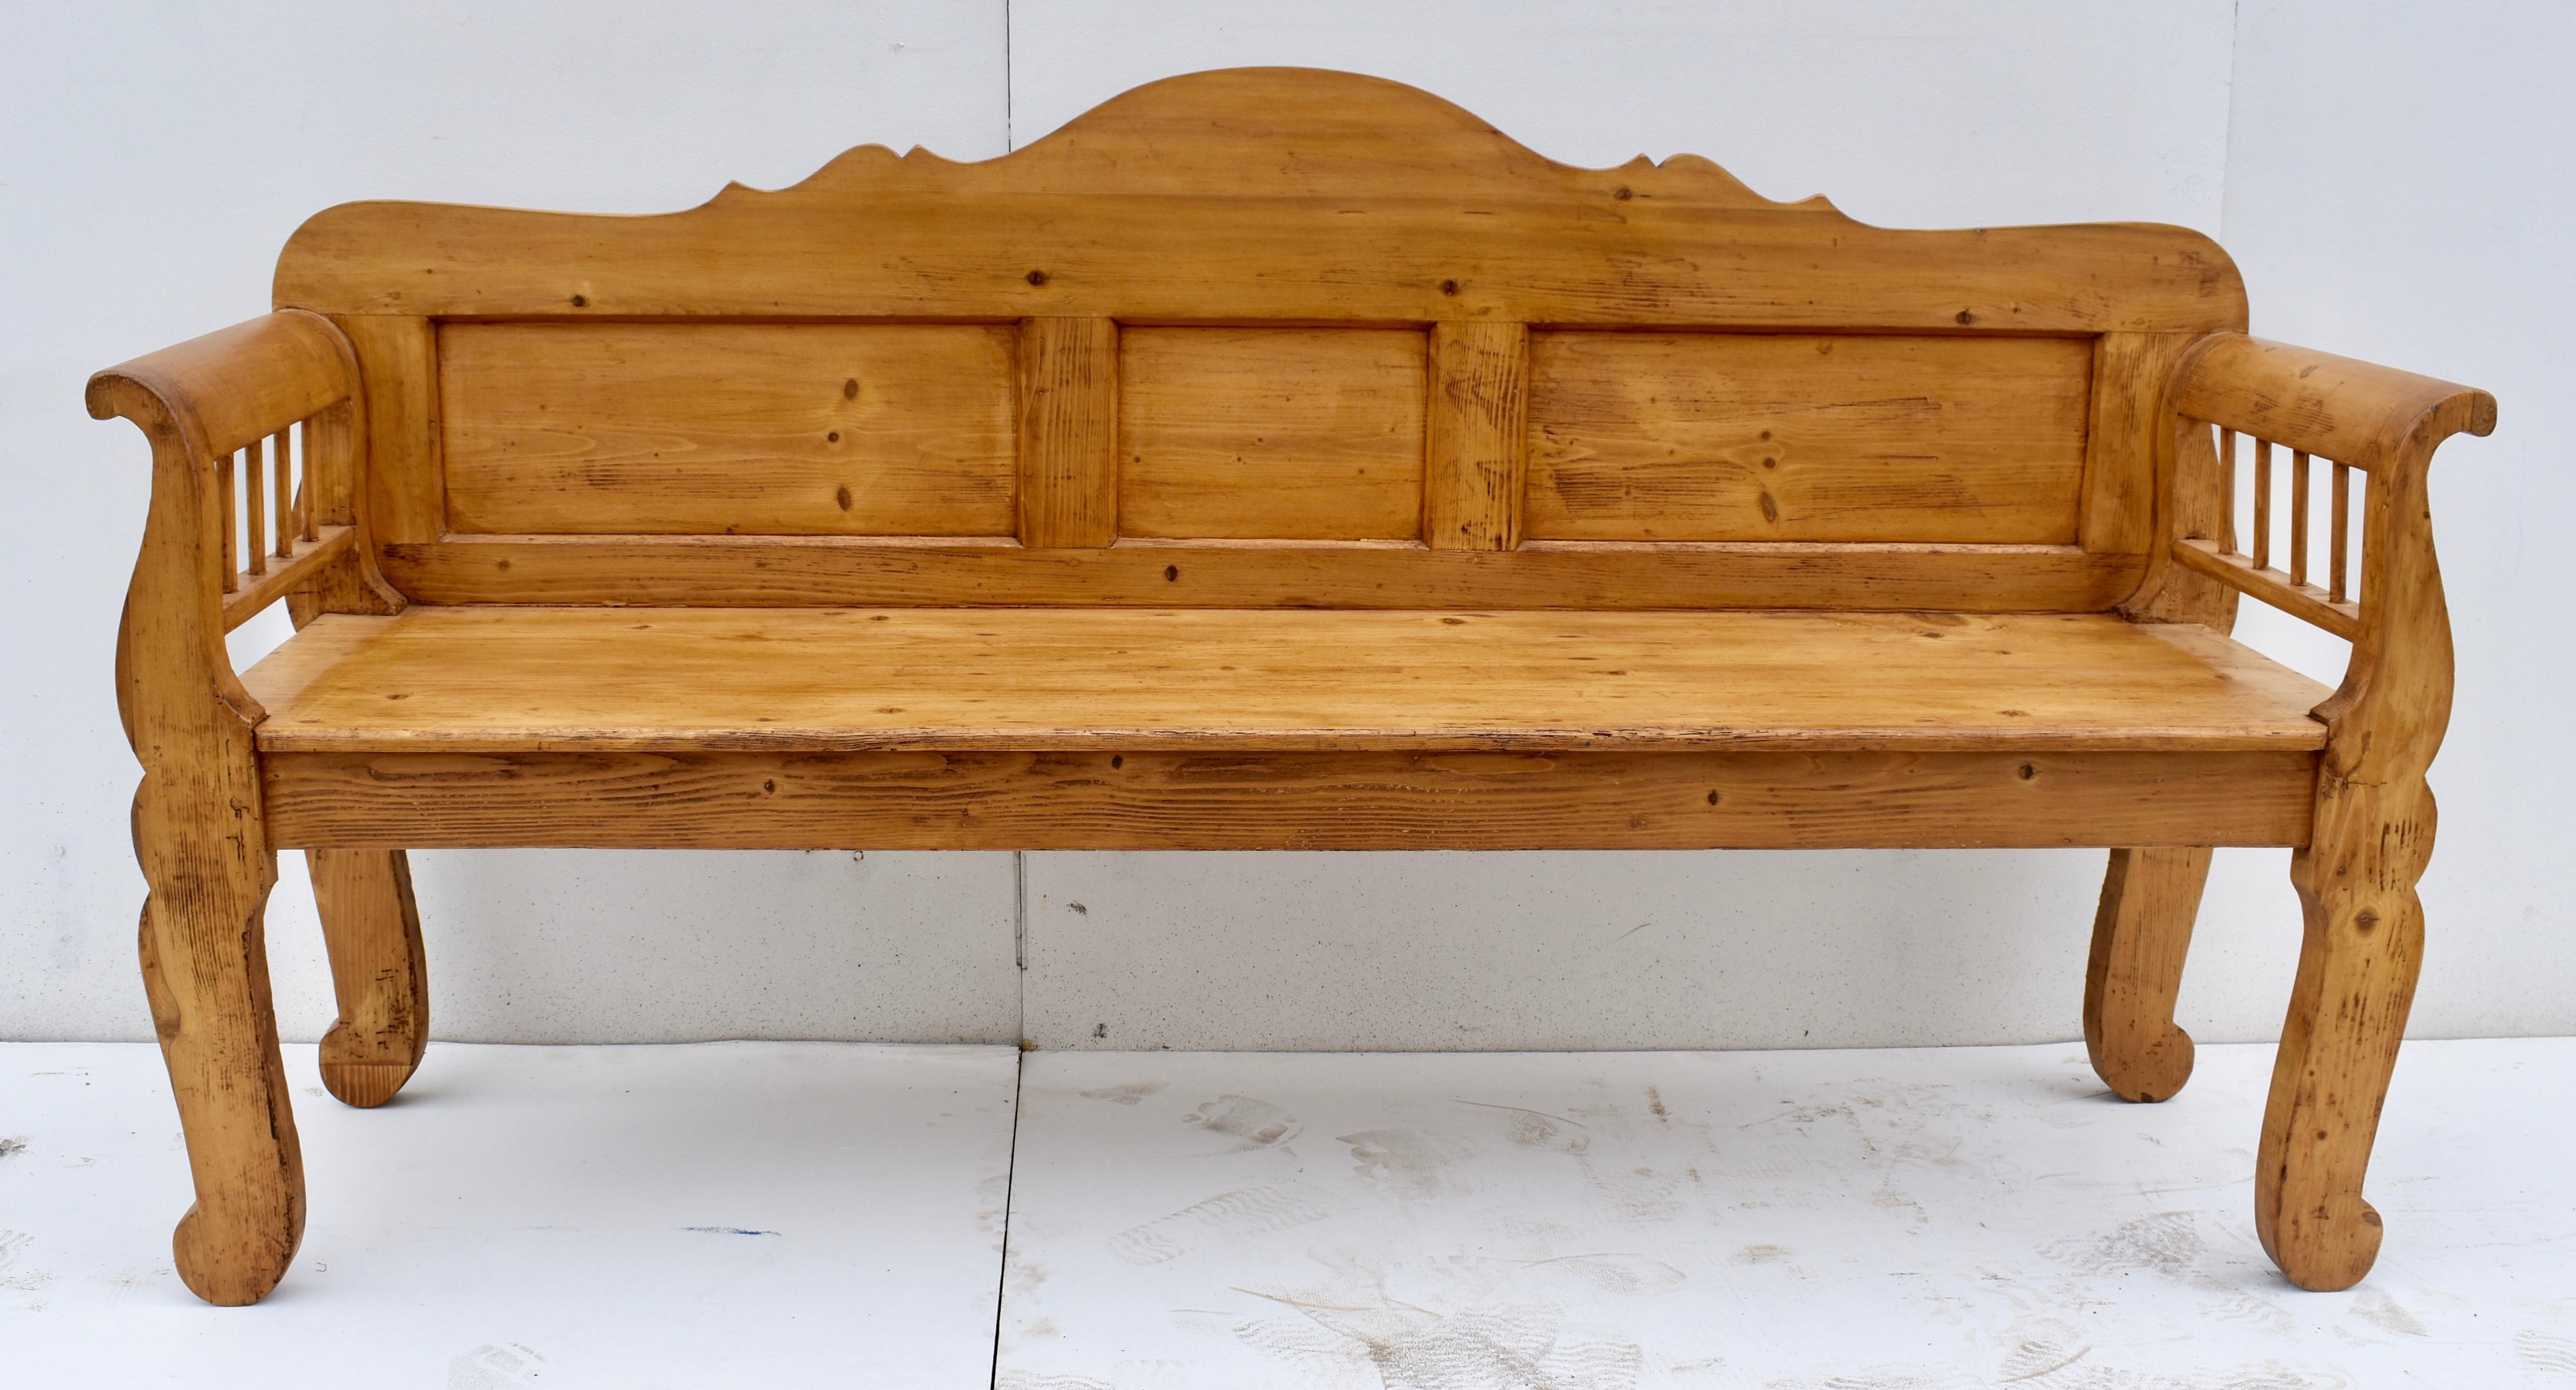 This fine bench is as sturdy as it is handsome. The scalloped top rail is beautifully proportioned and rests above three flat panels. The boldly scrolled arms enclose four spindles each side. Four stylized cabriole legs add to the presence of the